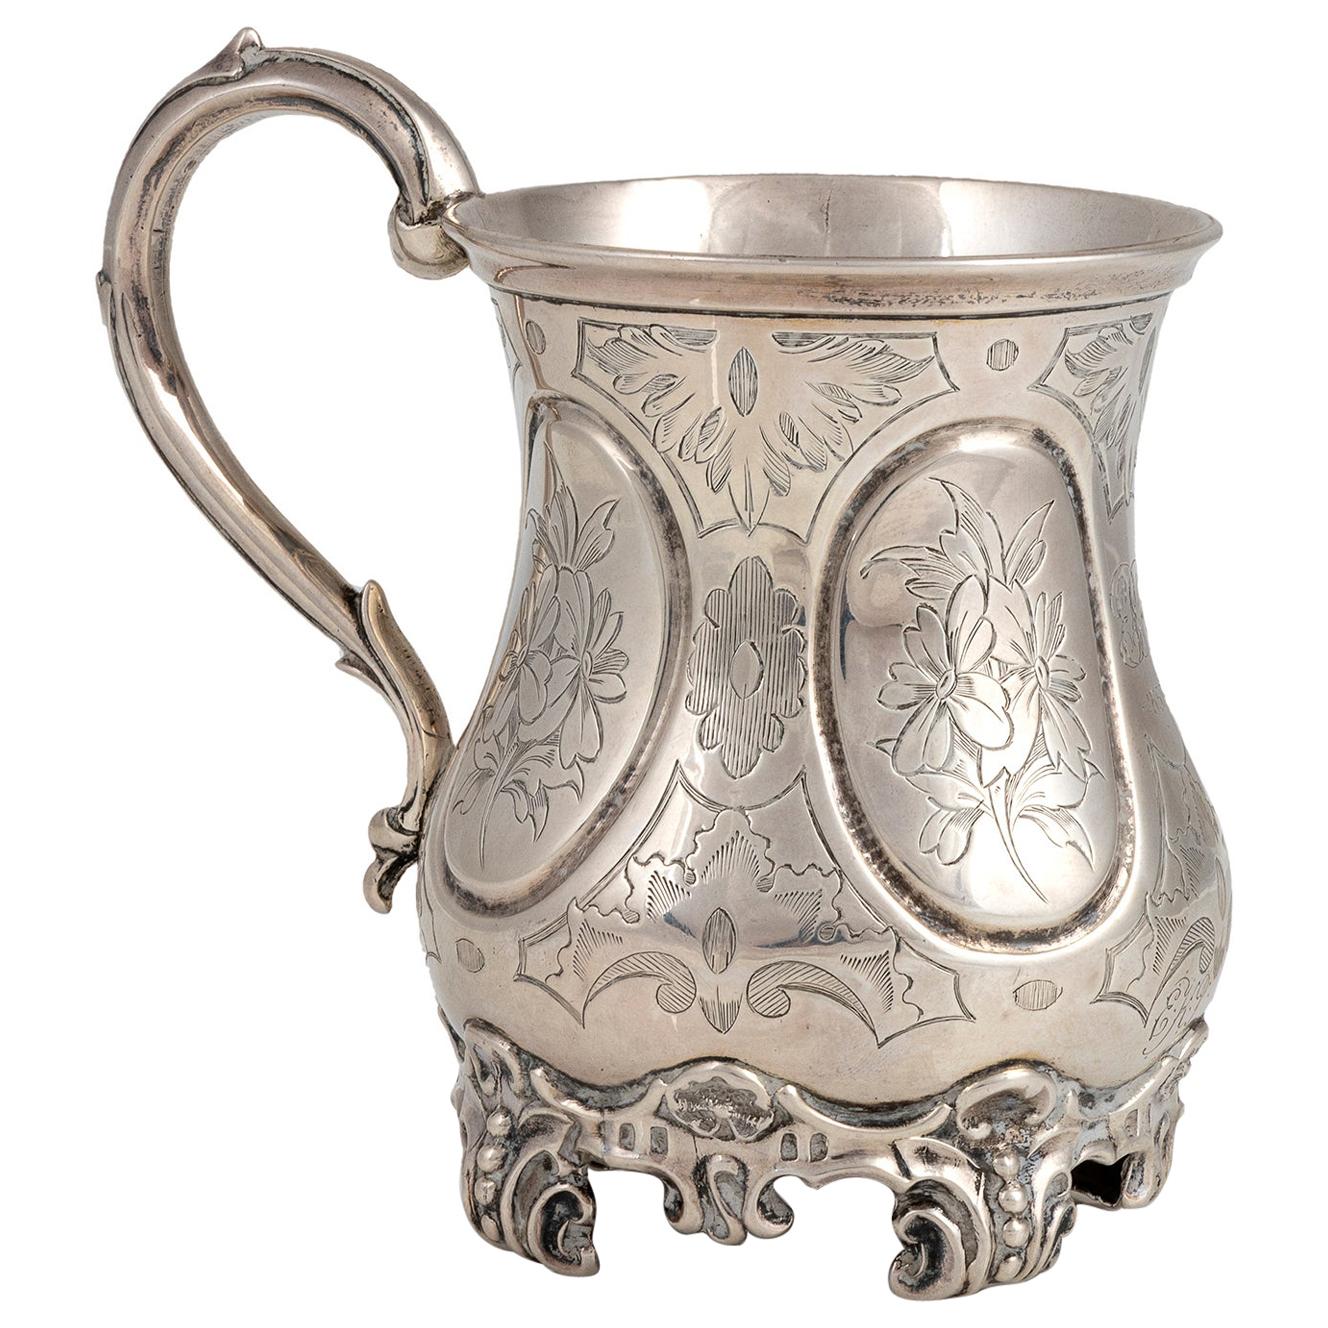 Silver Victorian Mug by George J. R. and E. C. Brown, England, Mid-19th Century